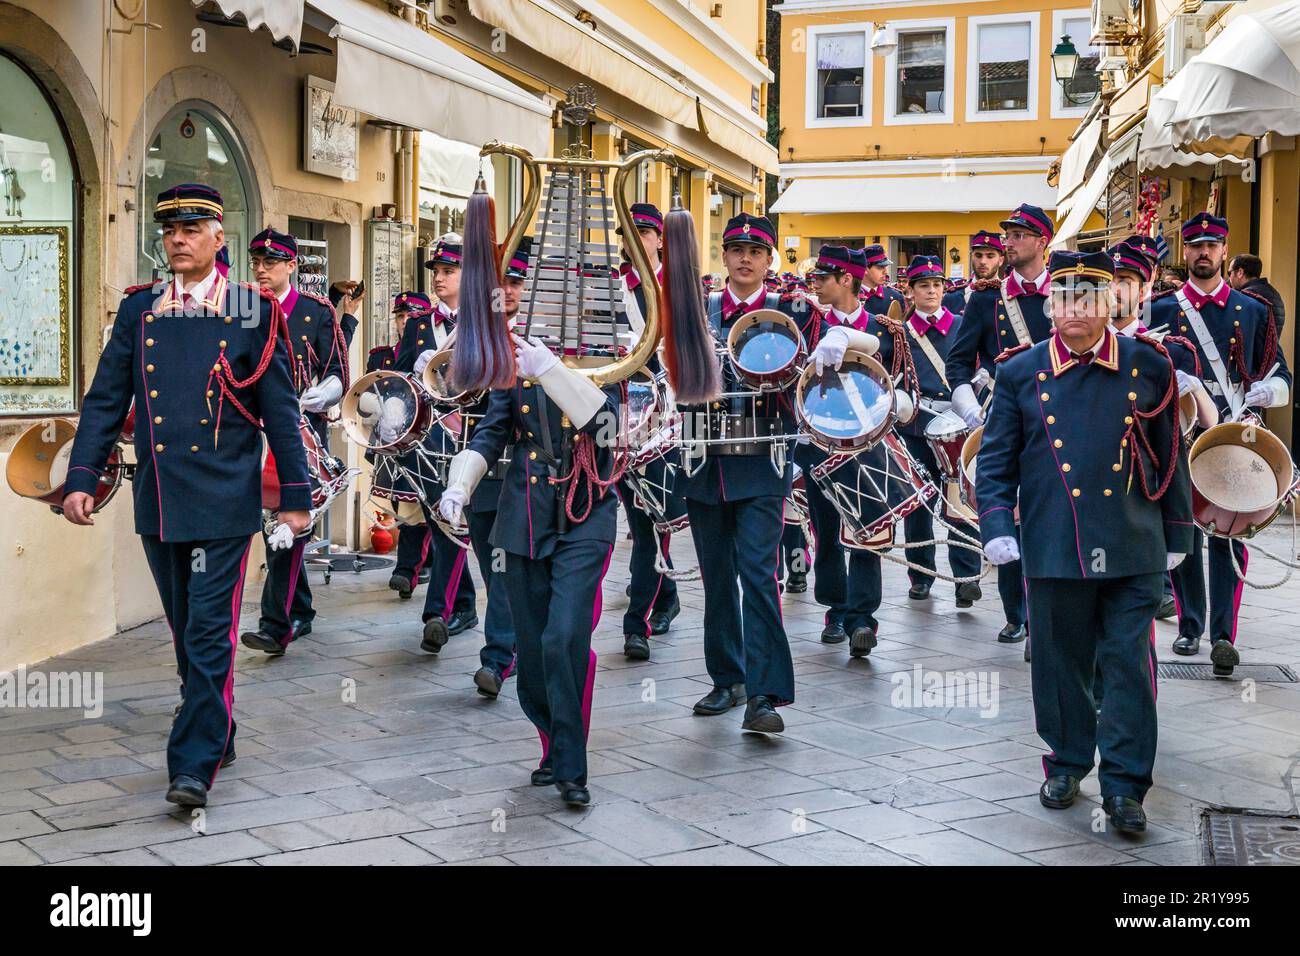 Marching band, lyre type instrument in center, performing in Holy Week at Nikiforou Theotoki street in Campiello (Old Town of Corfu) section, in town of Corfu, Corfu Island, Greece Stock Photo